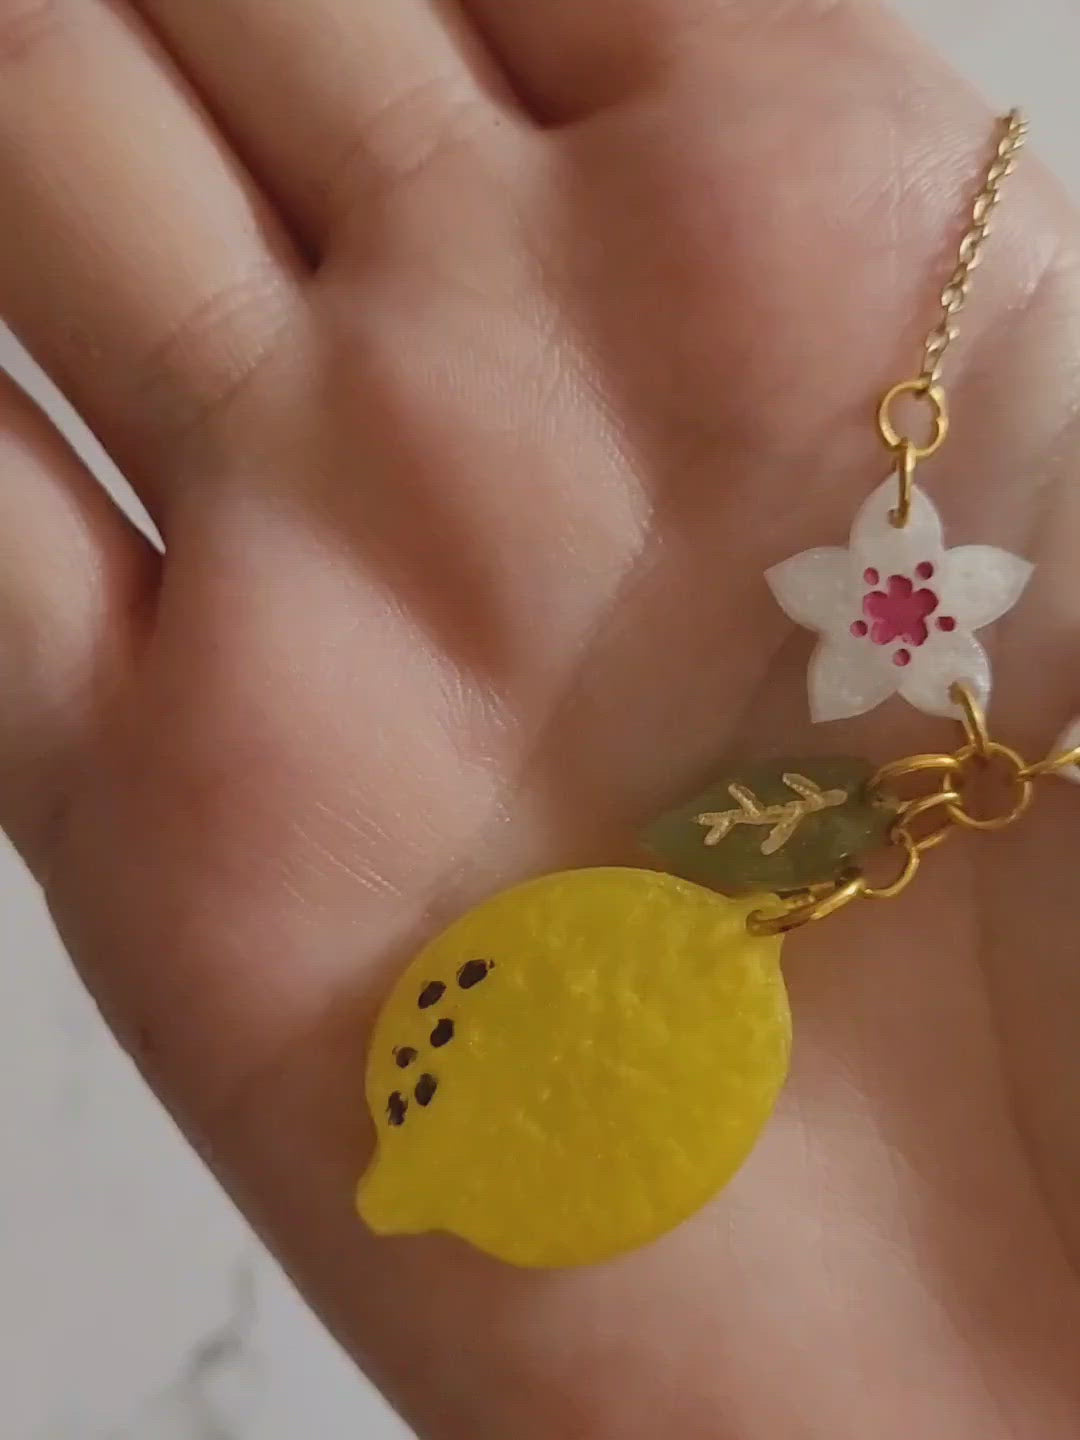 Closeup of resin lemon blossom necklace in palm of hand to show size and color detail.